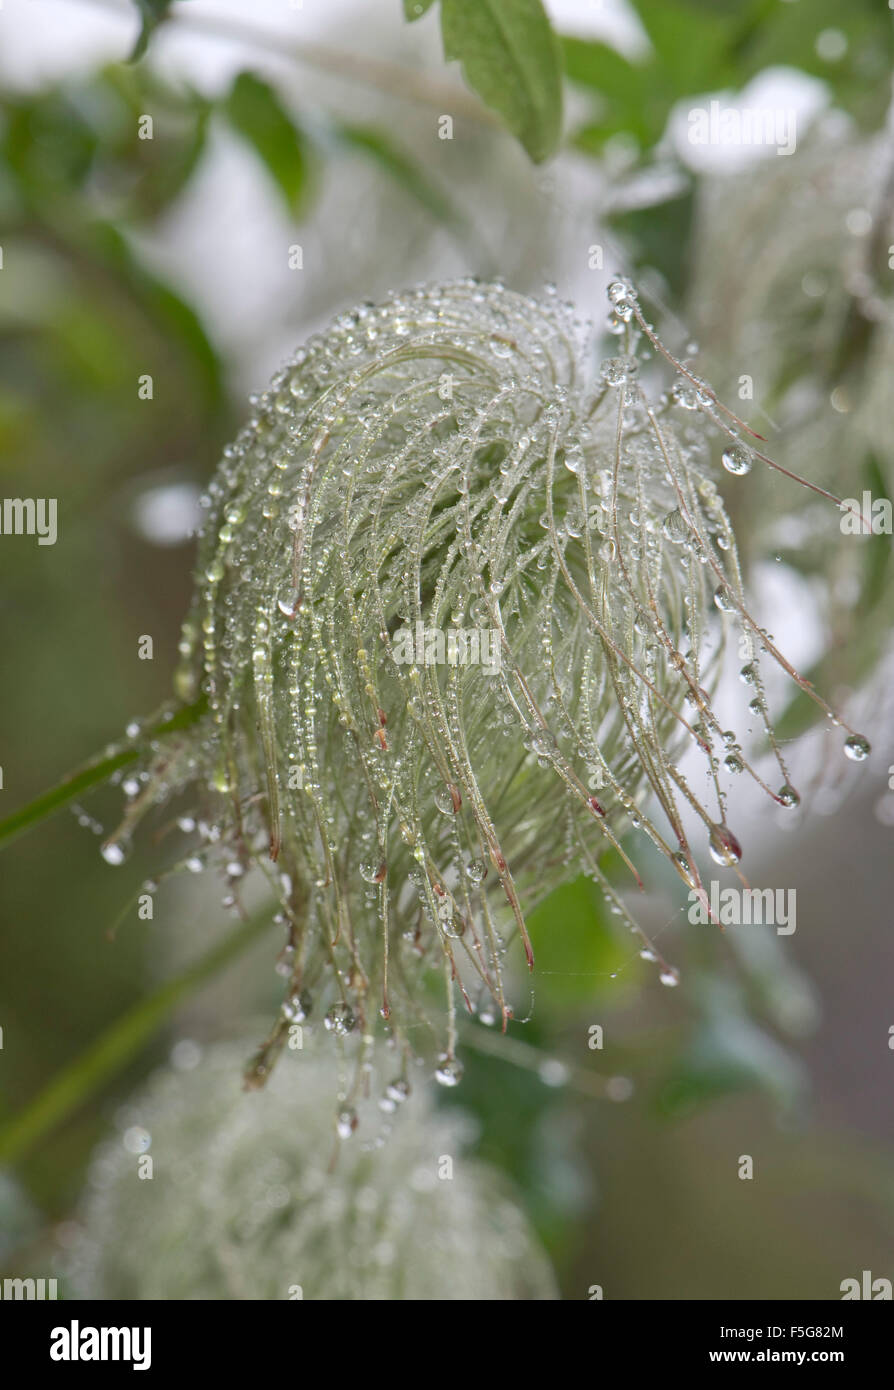 Fog or mist droplets condensed on the elements of the seed head of Clematis tangutica in autumn Stock Photo